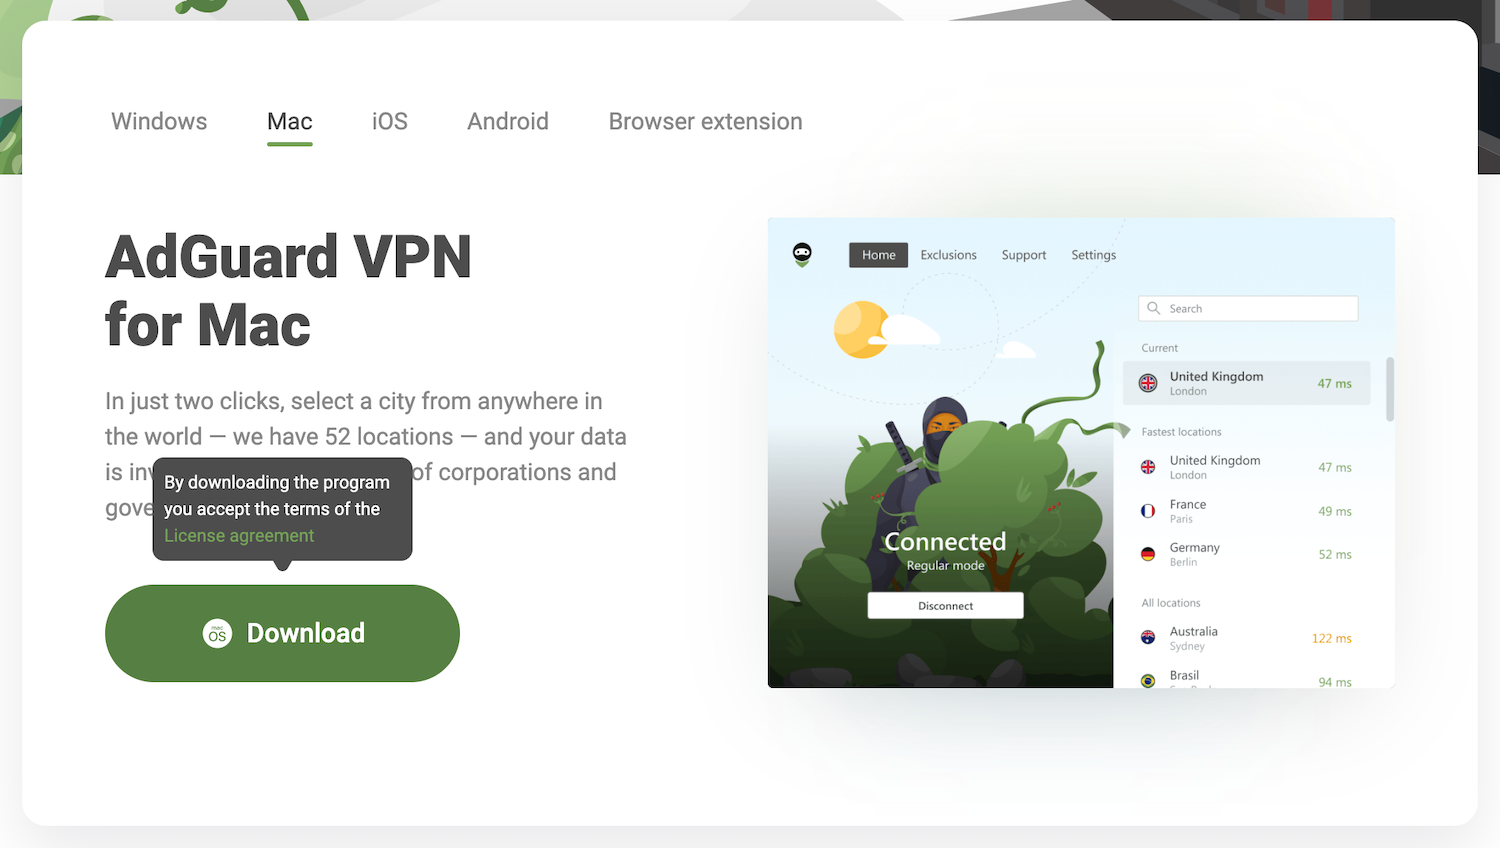 adguard vpn is not supported